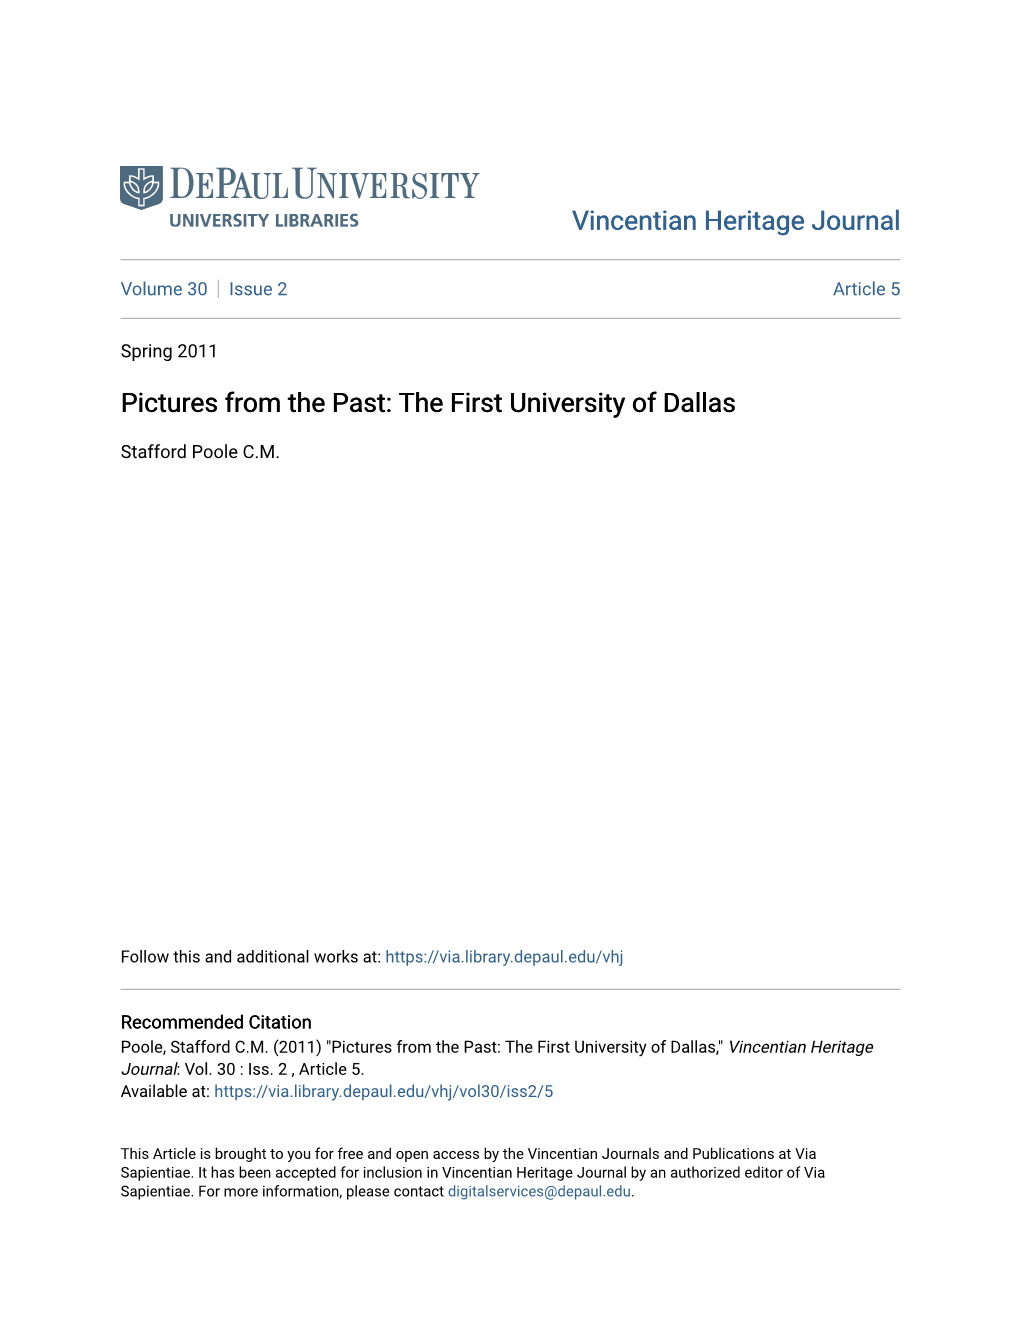 The First University of Dallas